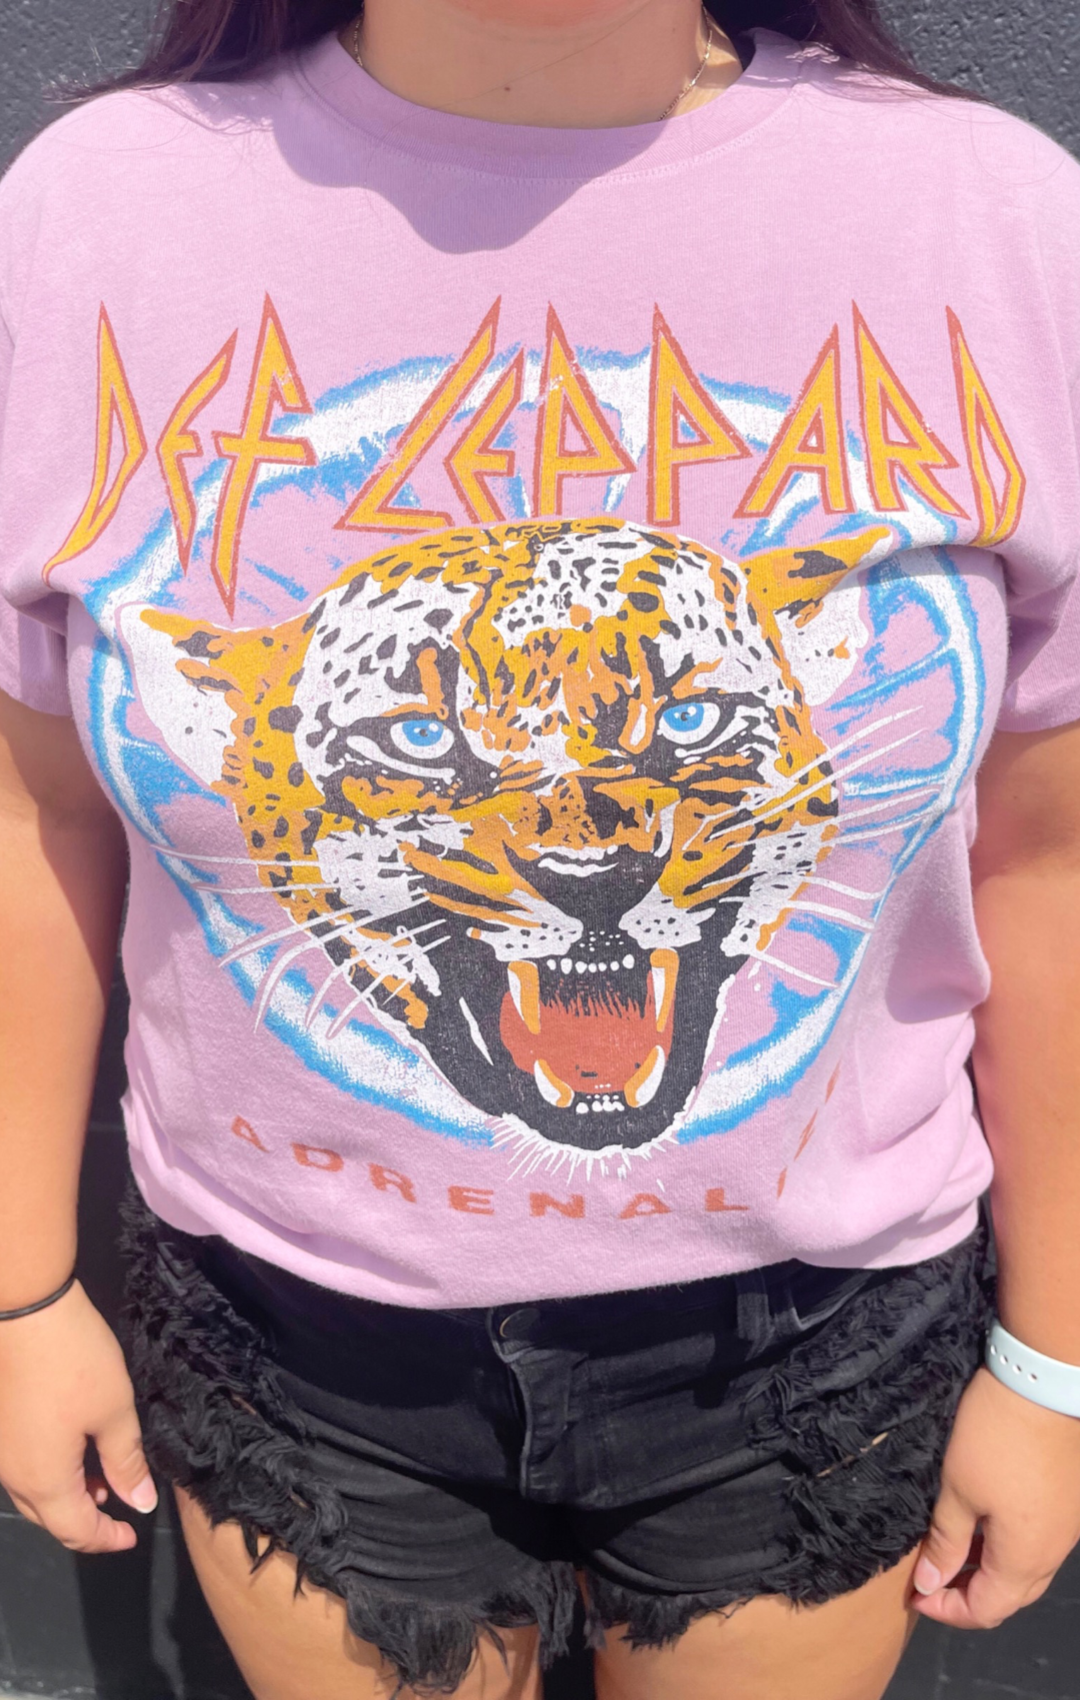 Def Leppard Adrenalize Tour Tee